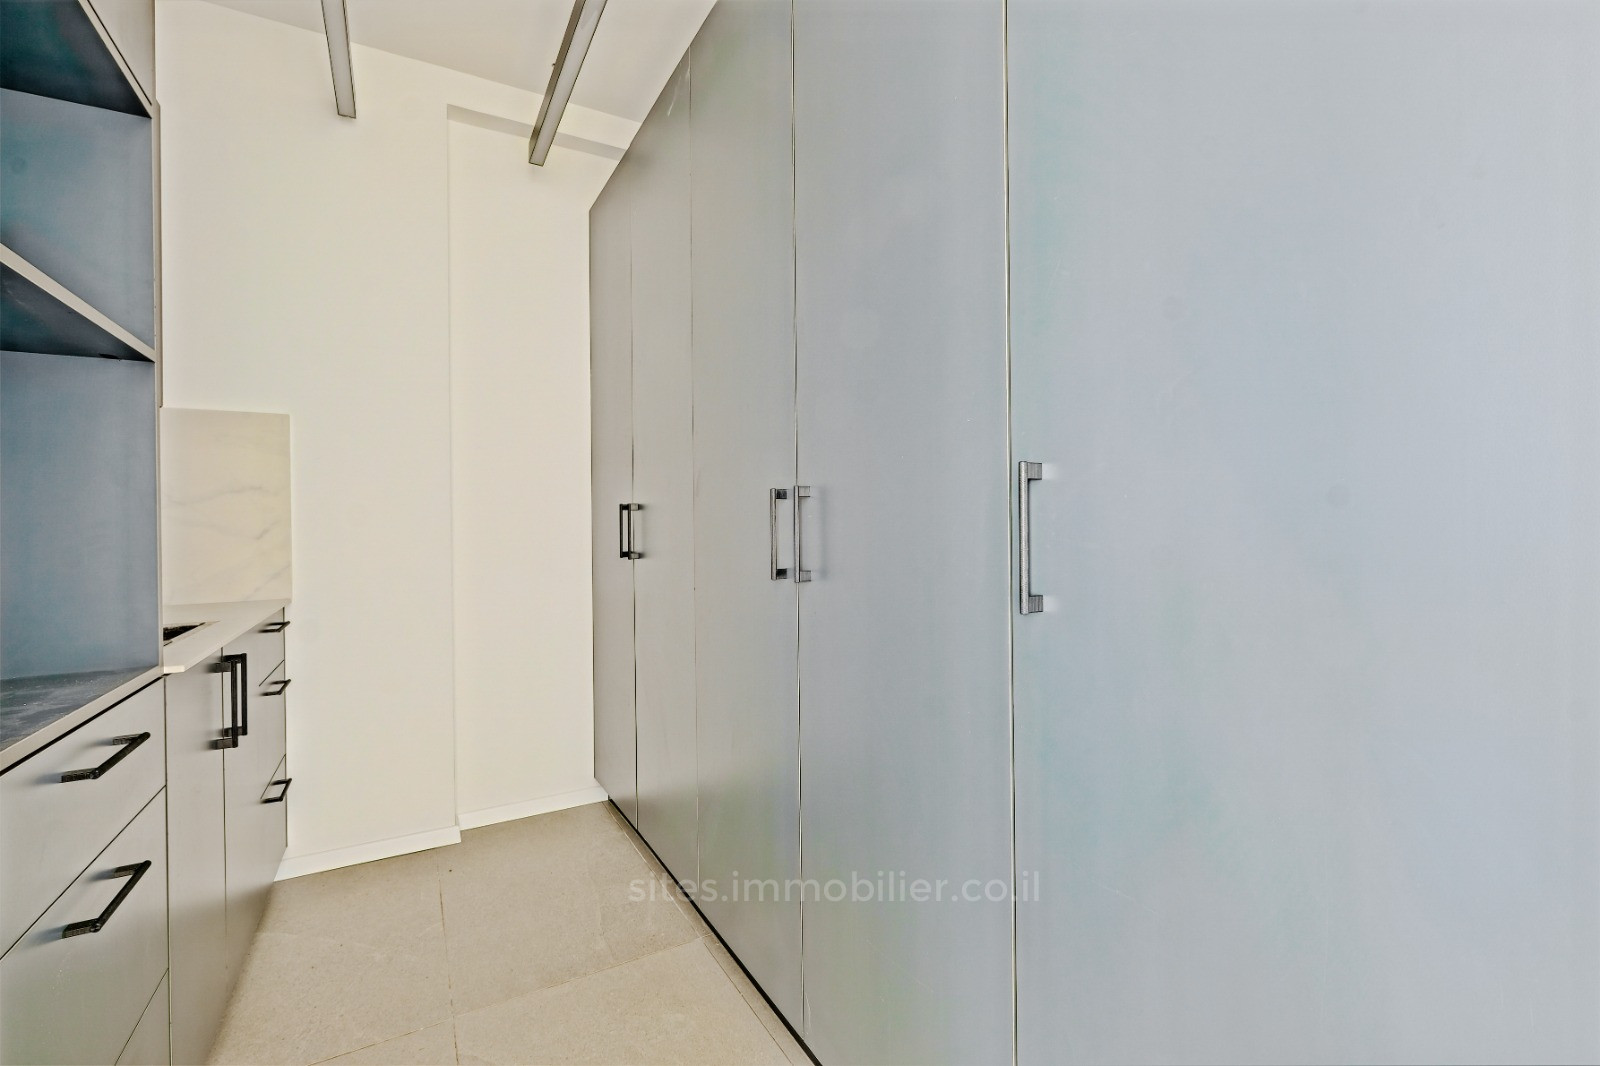 Offices 7 Rooms Netanya City center 457-IBL-1133